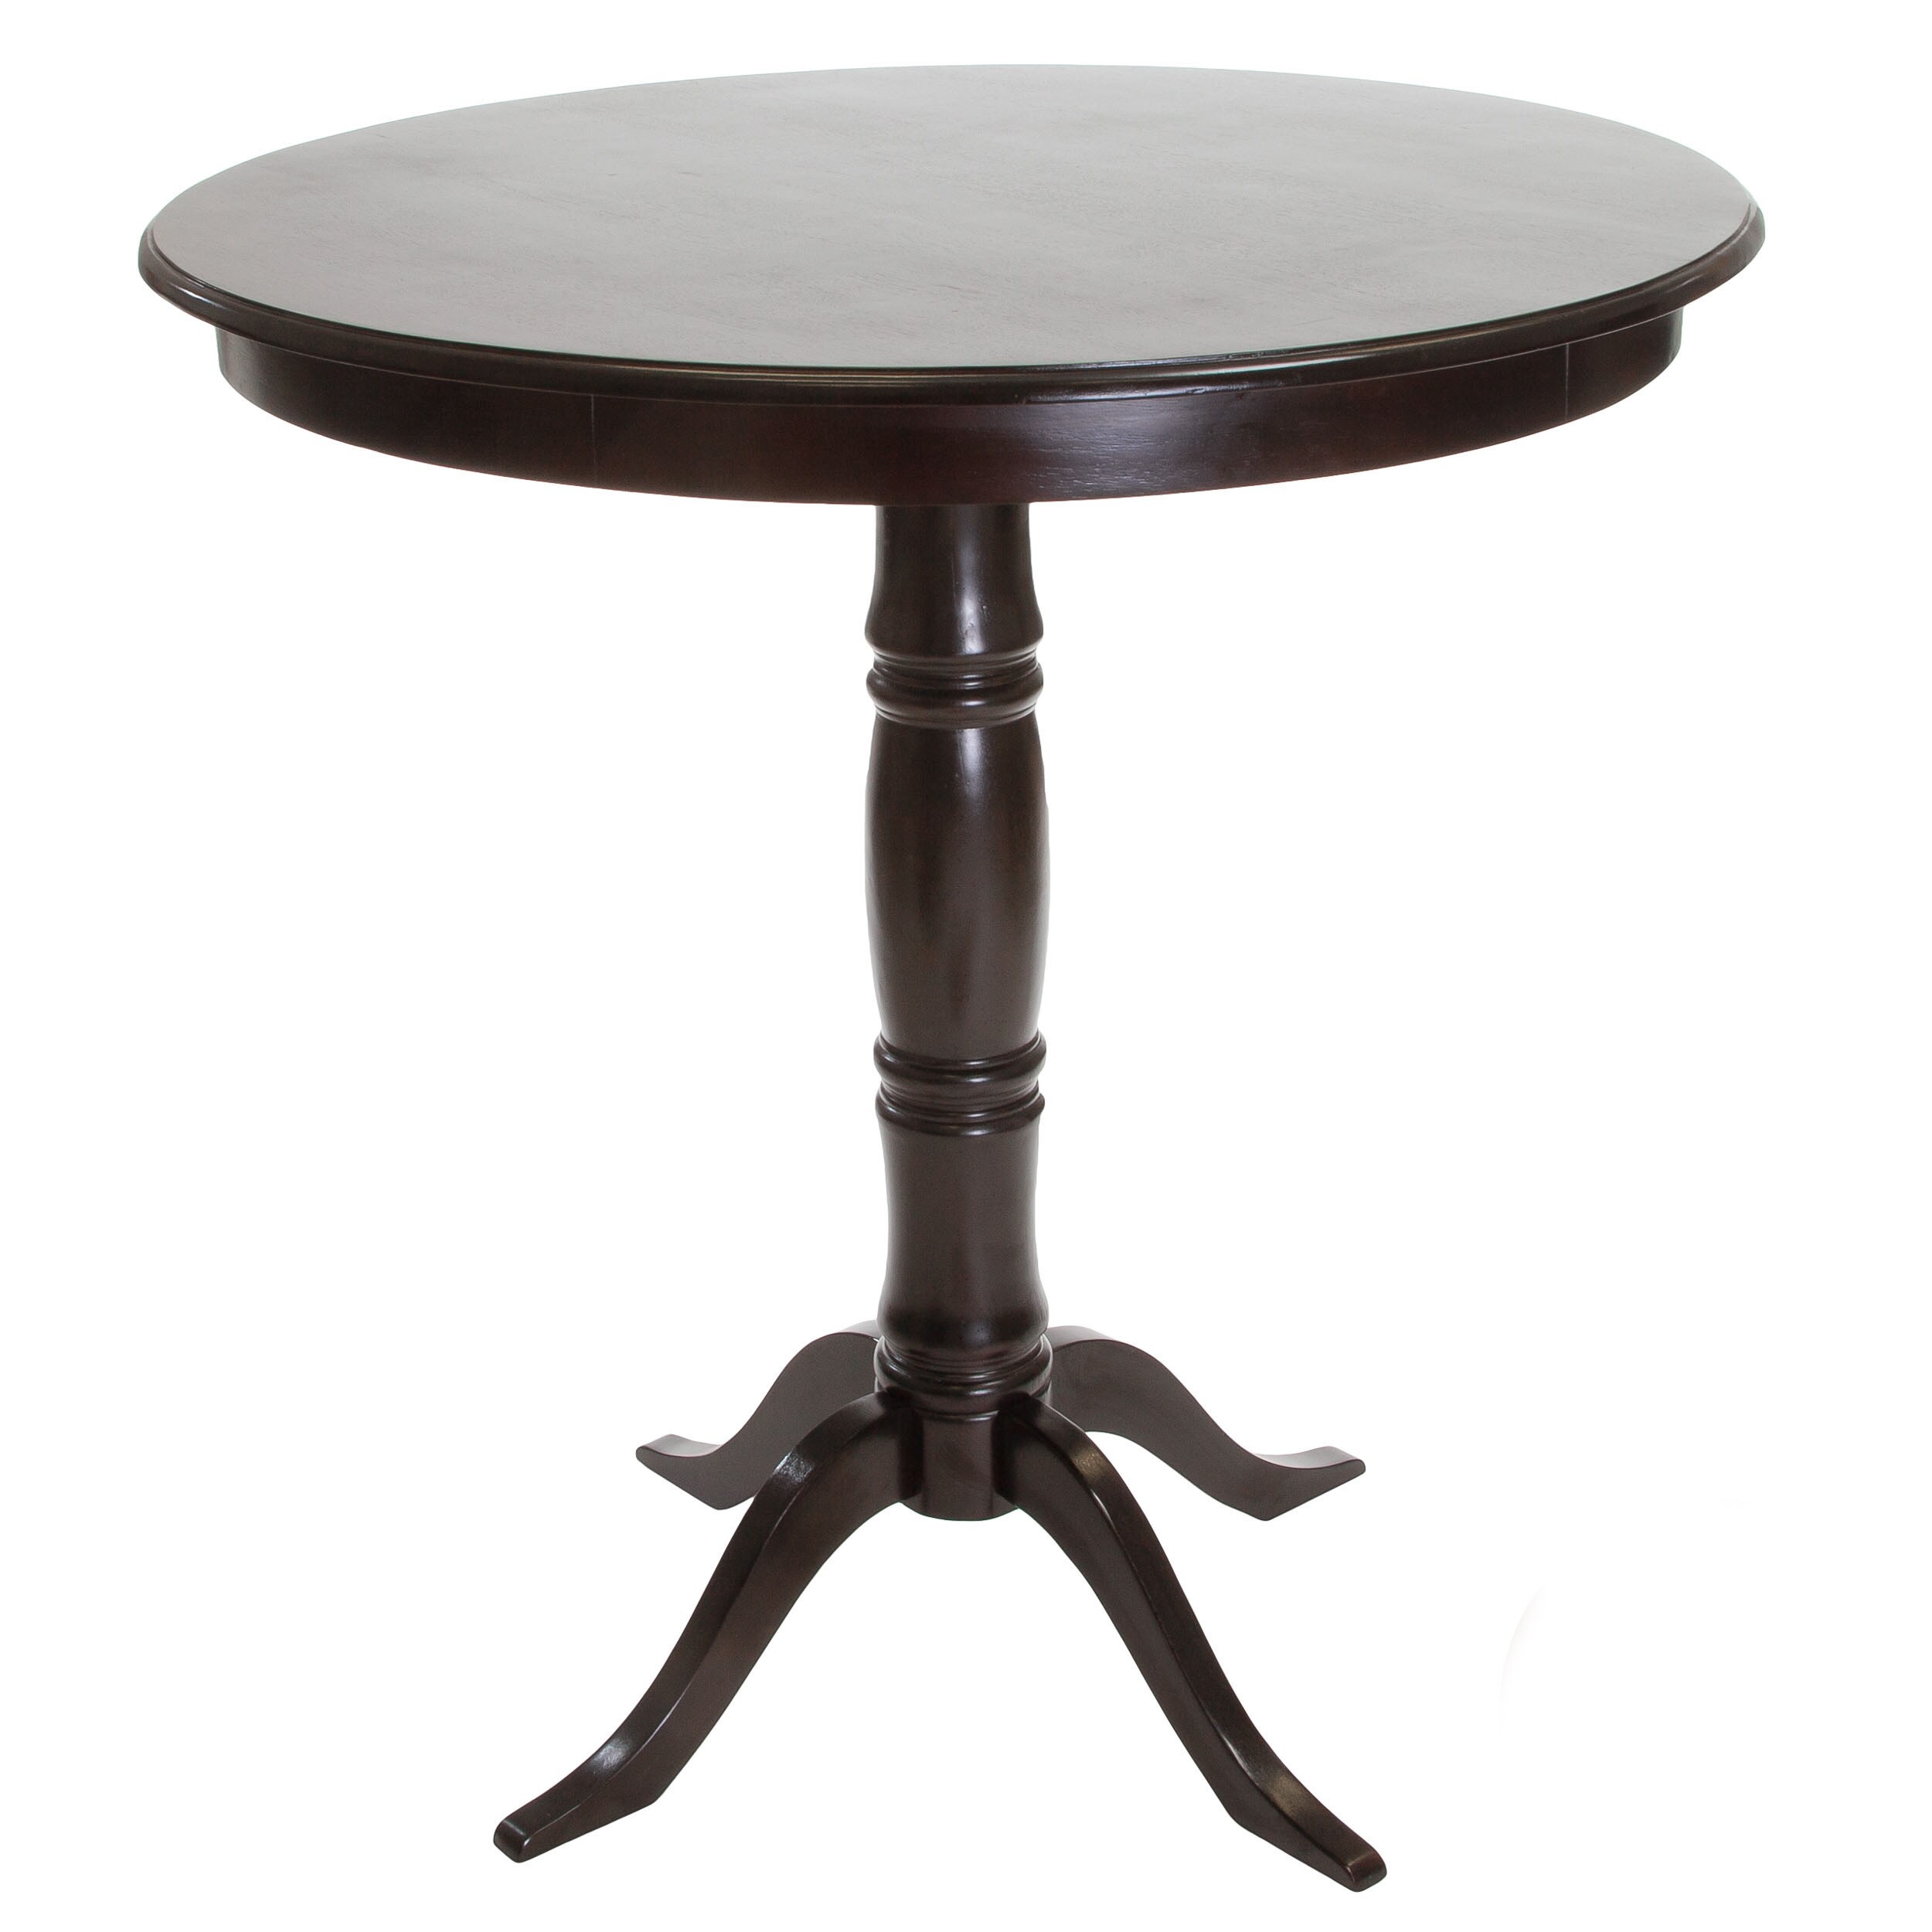 Wood Bar Table Today $228.99 Sale $206.09 Save 10%